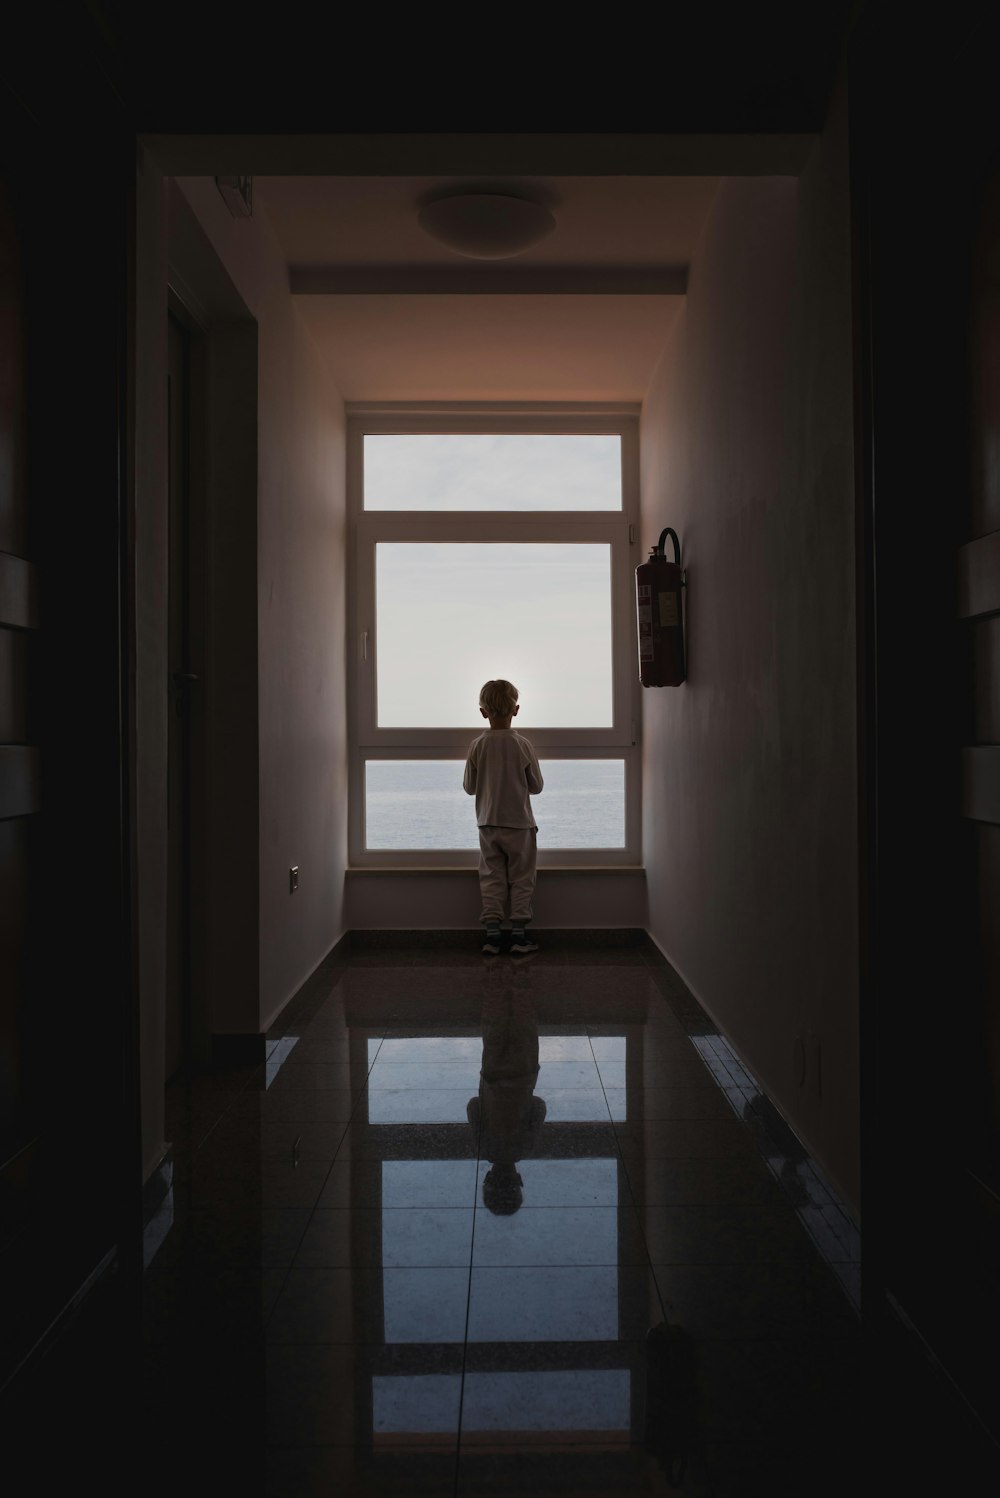 a person standing in a dark hallway looking out a window